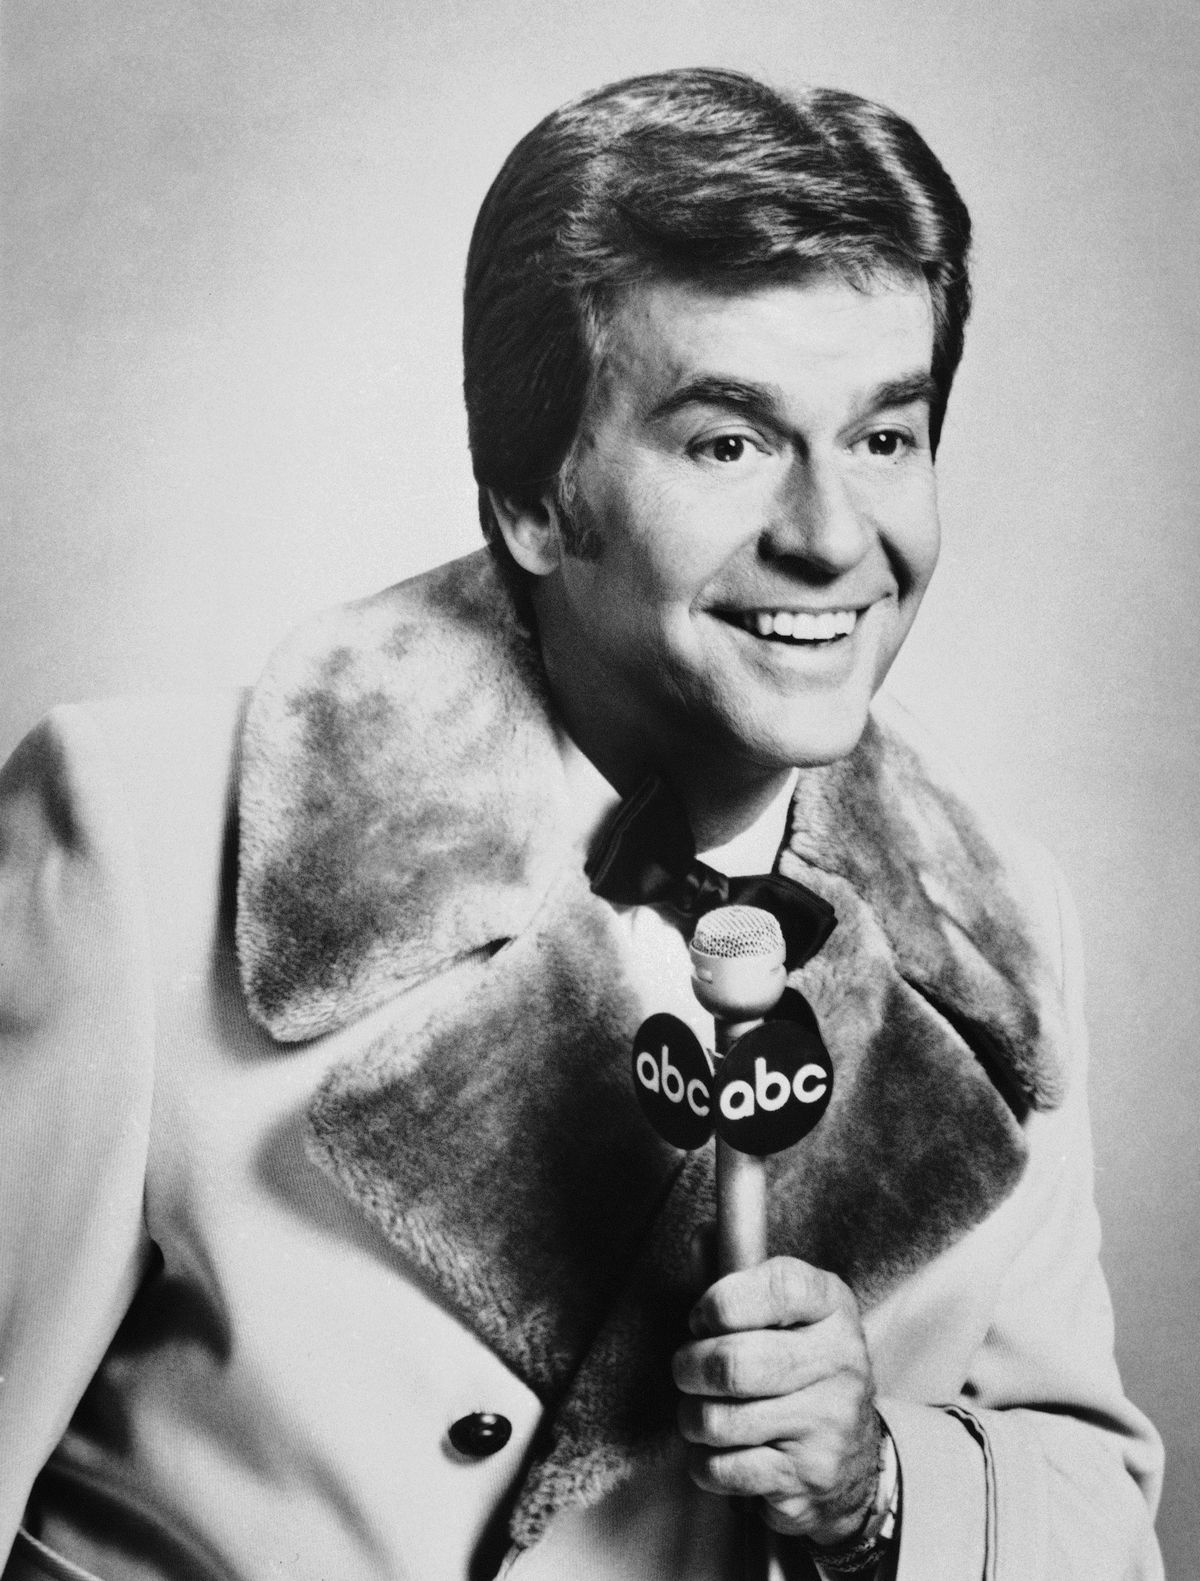 Dick clark age when died